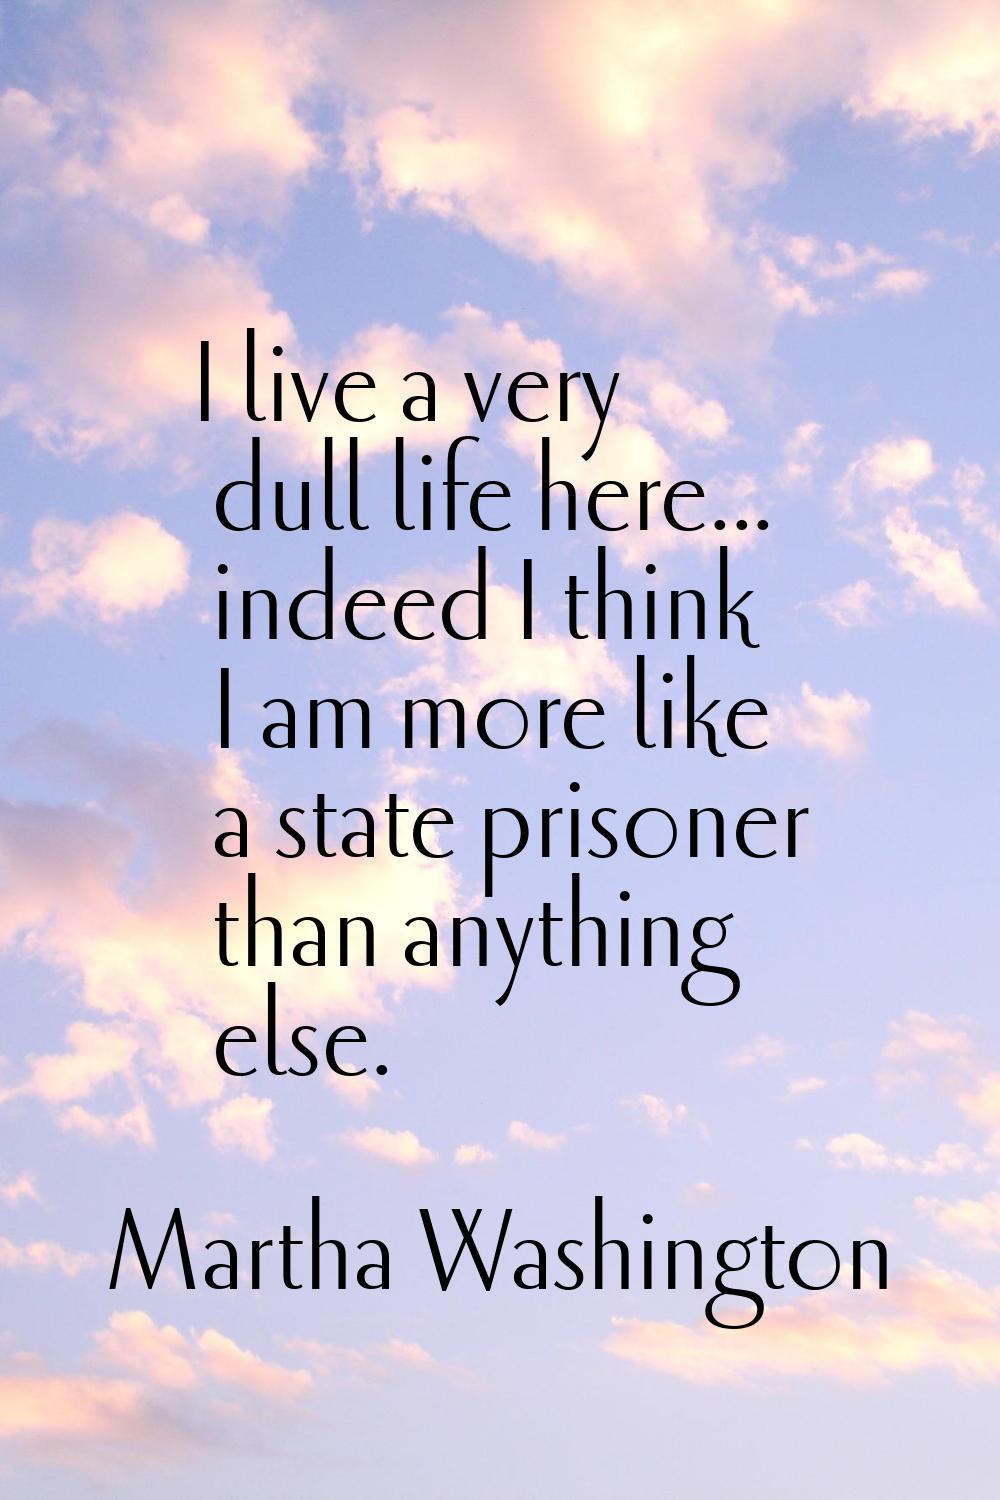 I live a very dull life here... indeed I think I am more like a state prisoner than anything else.